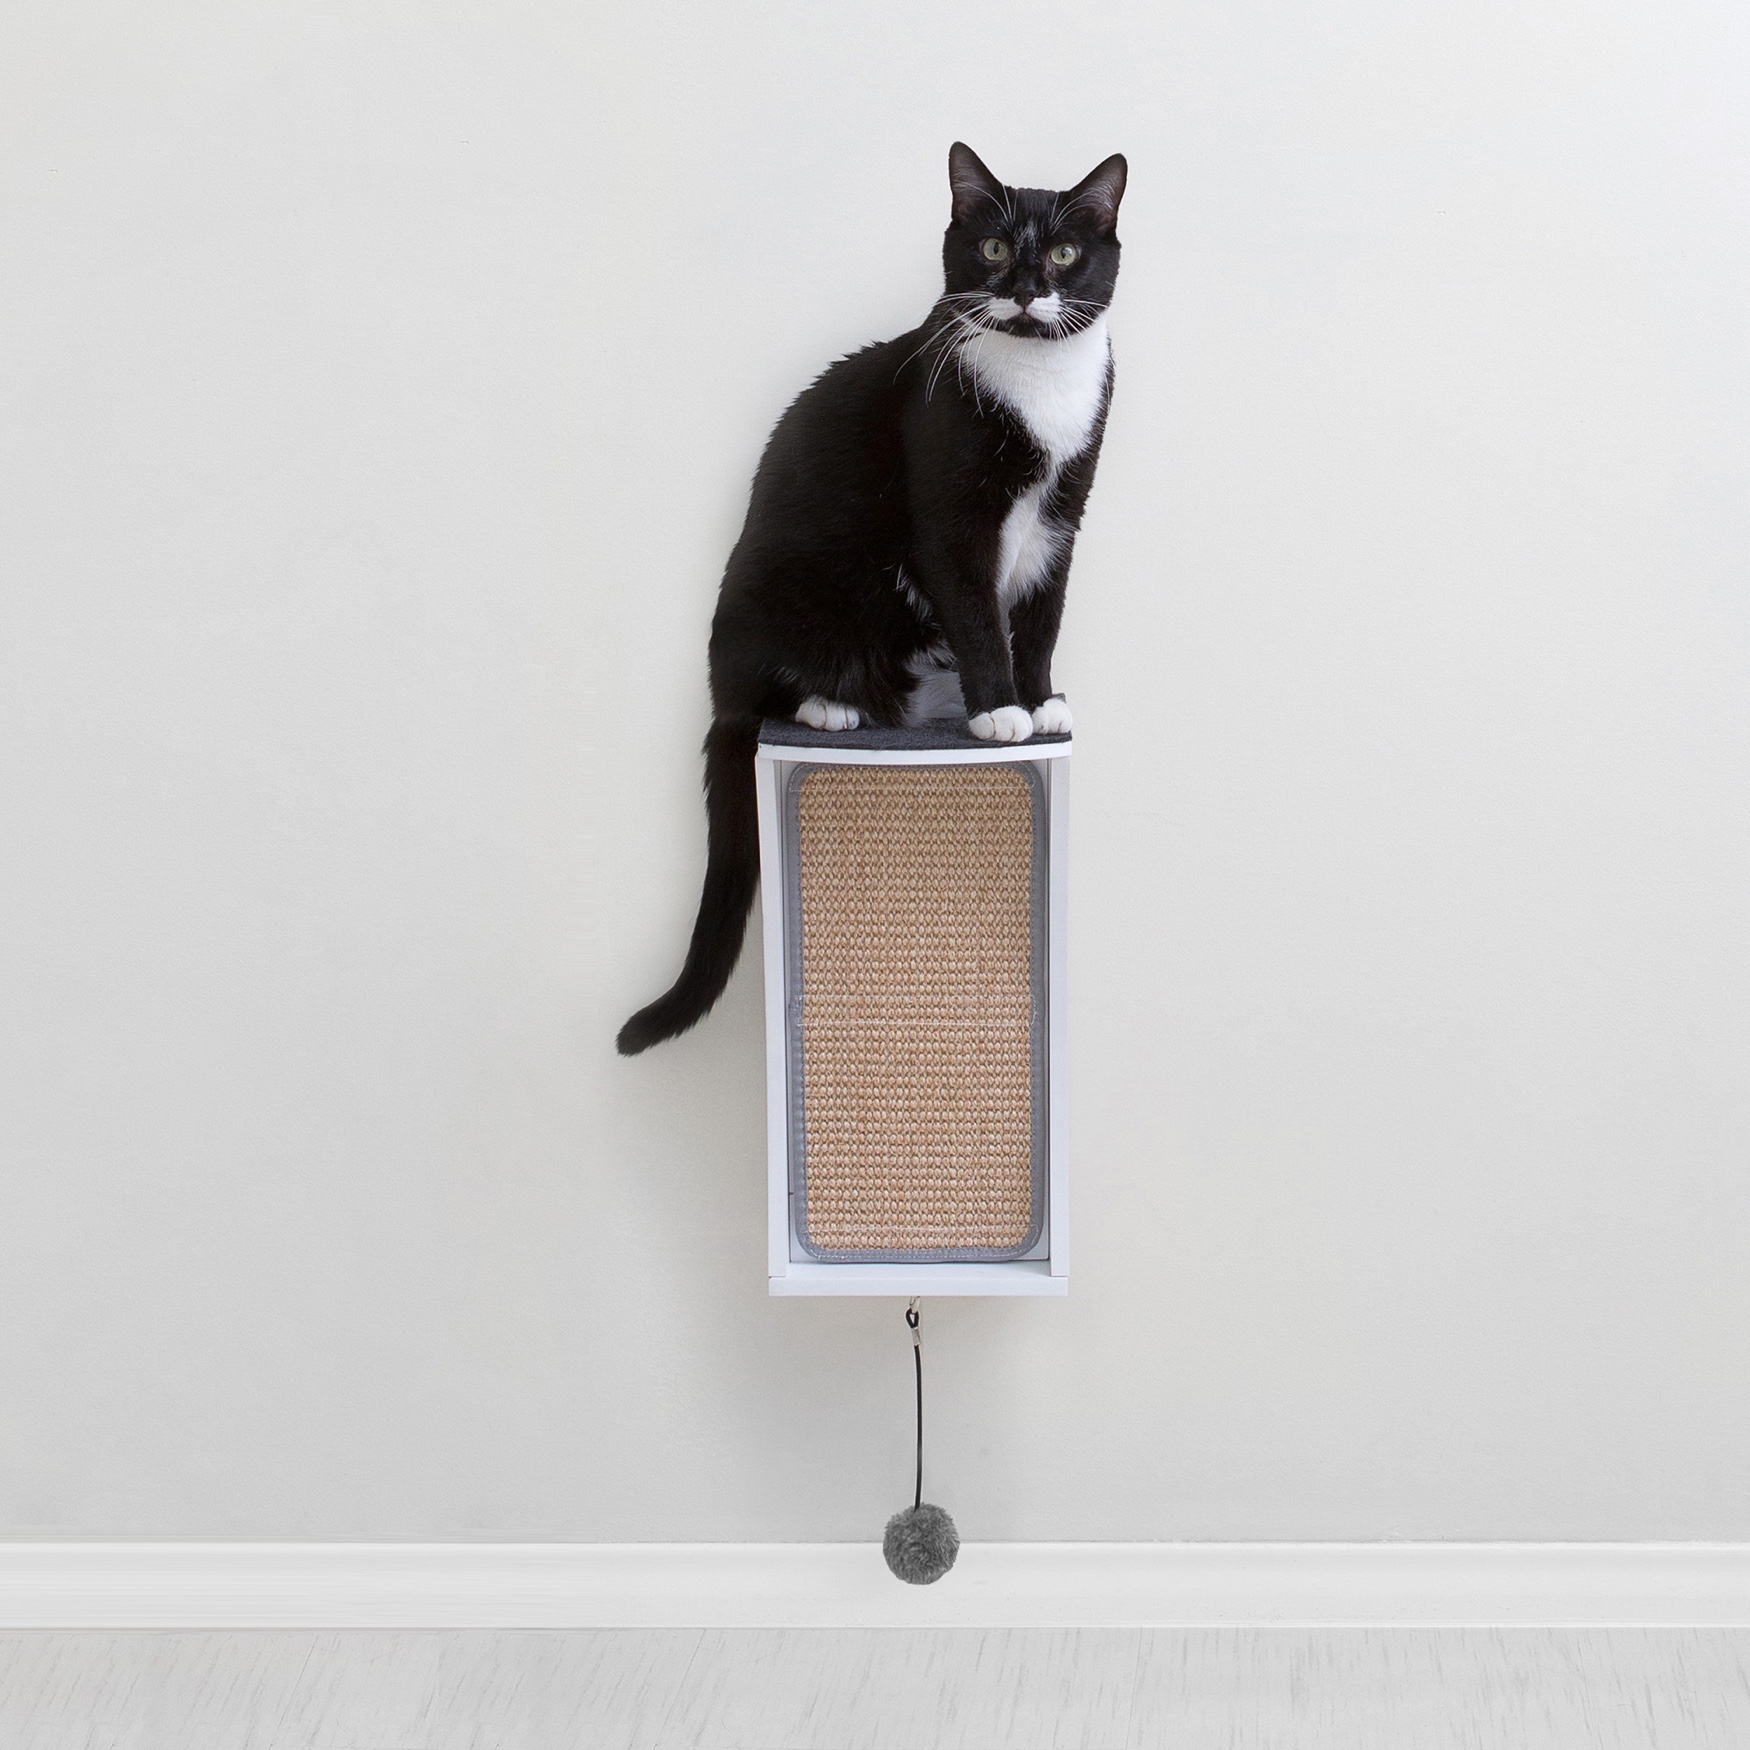 Hauspanther CATchall - Wall Mounted Cat Scratcher, Toy Storage & Perch, 